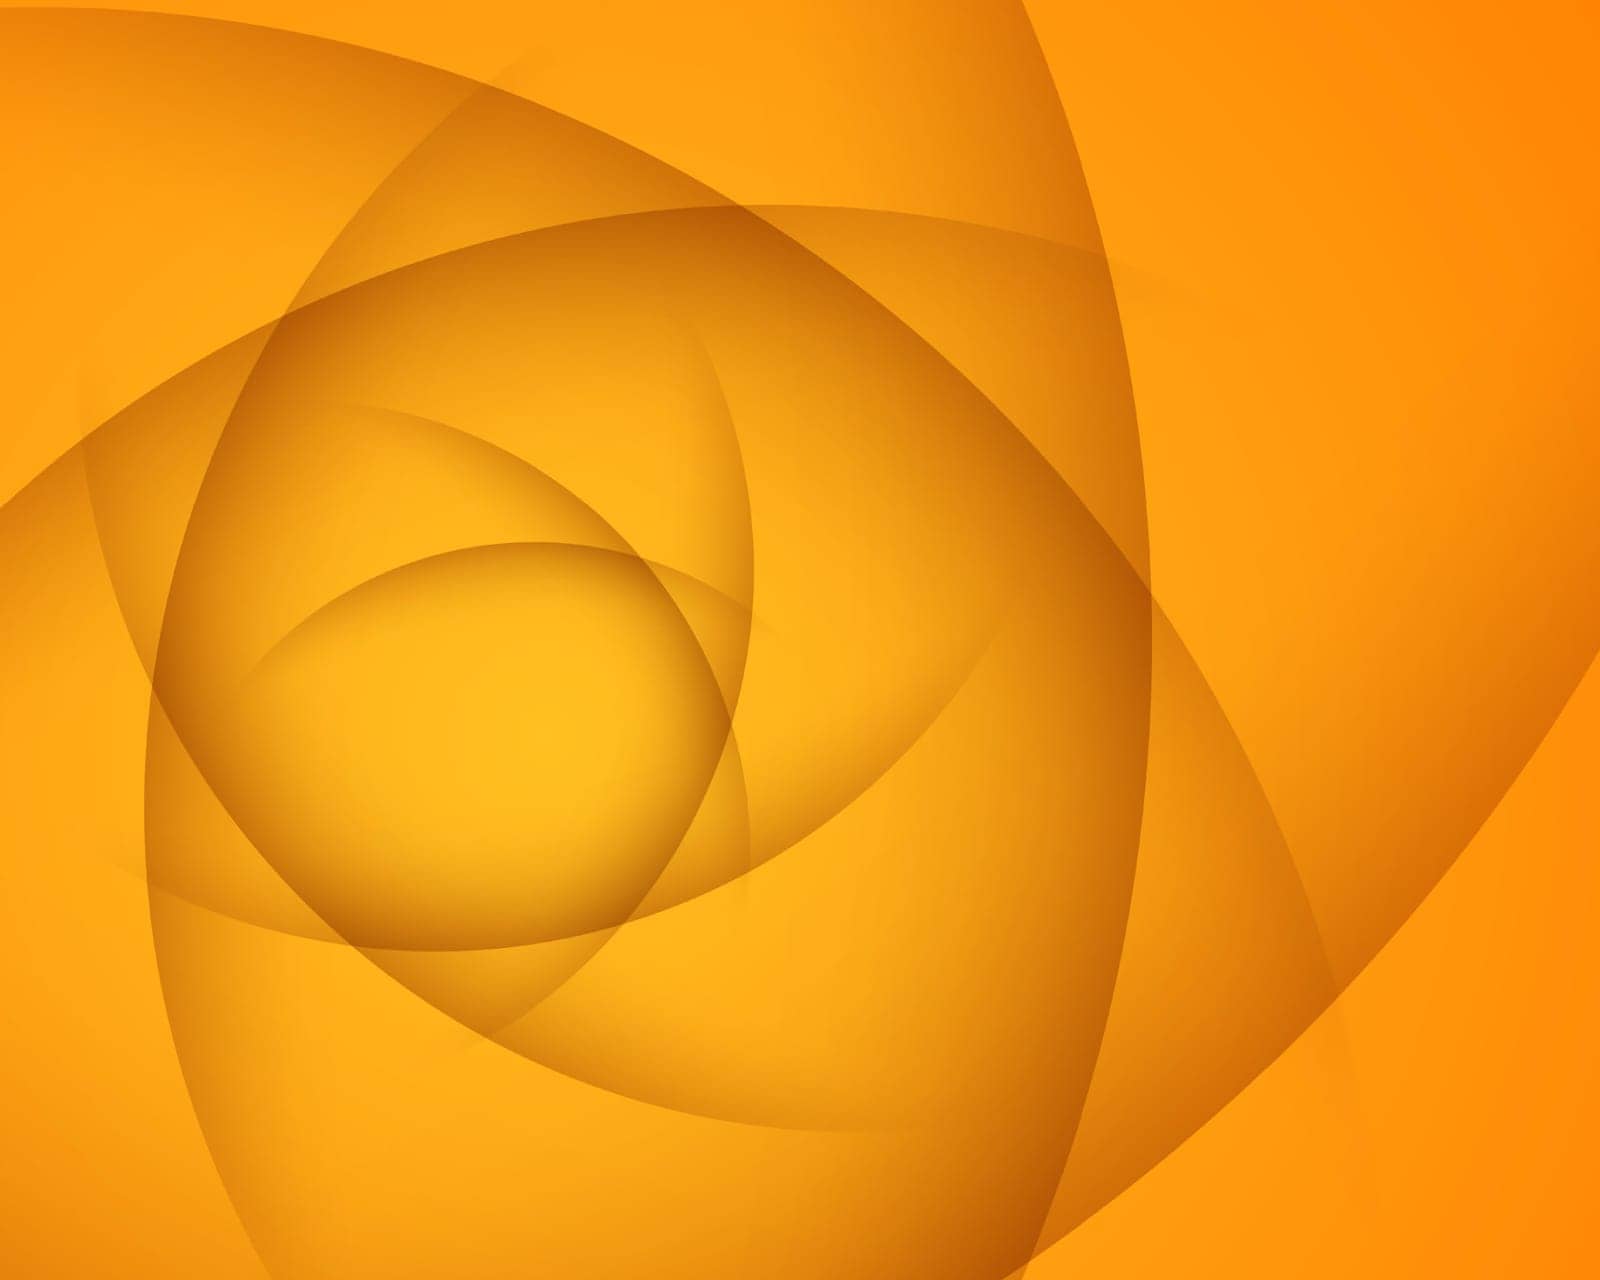 A gradient of warm orange hues forms an abstract backdrop with multiple transparent circles overlapping, creating a dynamic and soothing visual effect.